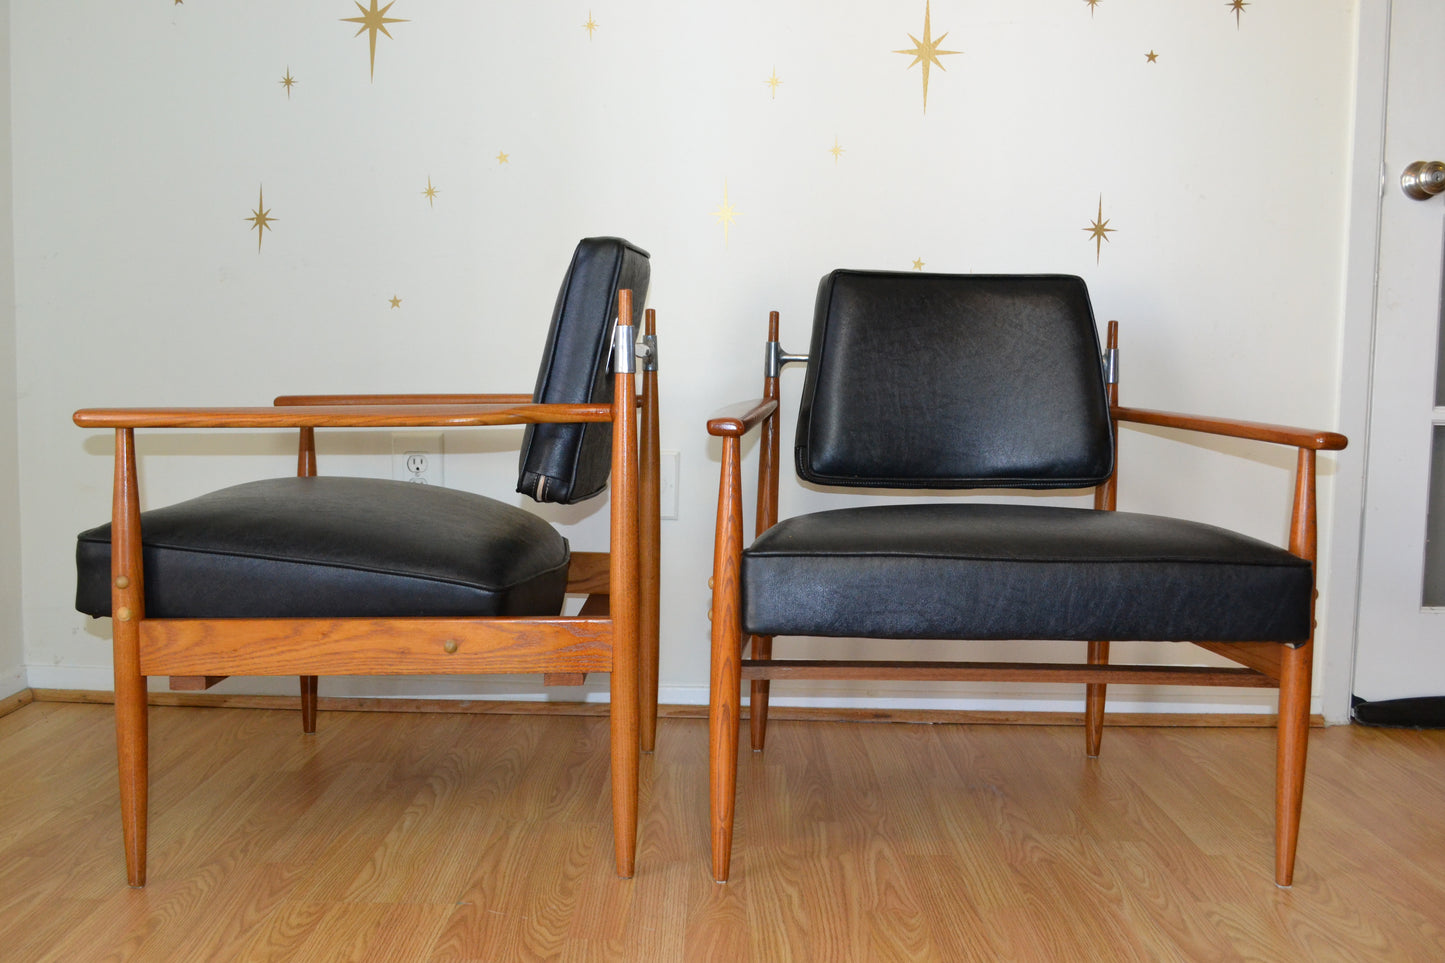 Pair of Mid-Century Lounge Chairs by Selrite